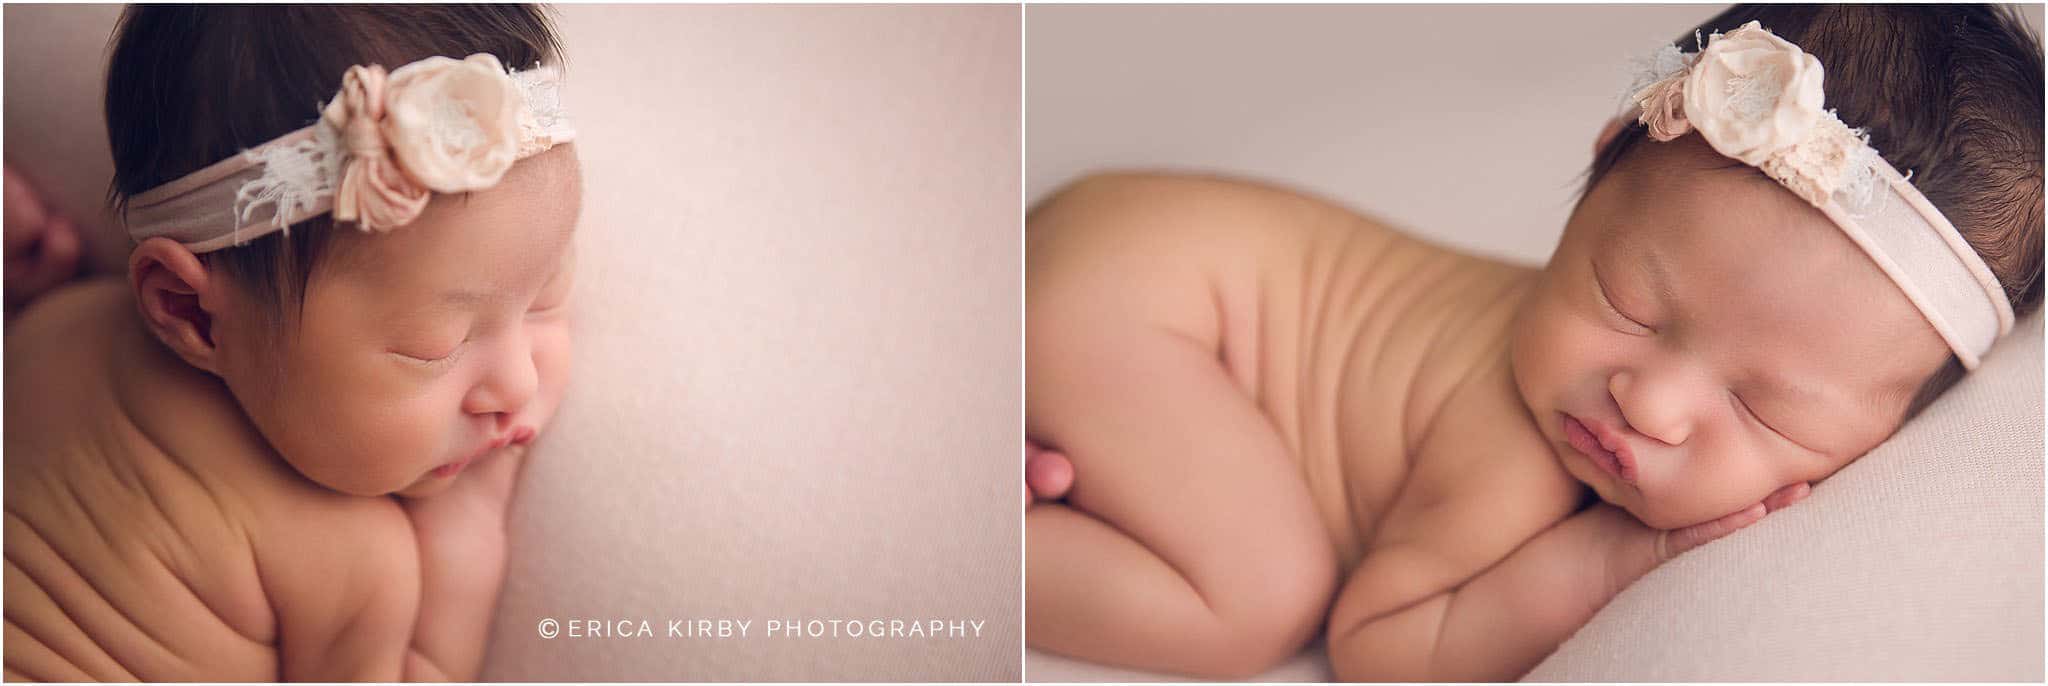 NWA Newborn Photographers | Baby girl newborn session in Rogers AR with soft pinks and florals | Erica Kirby Photography